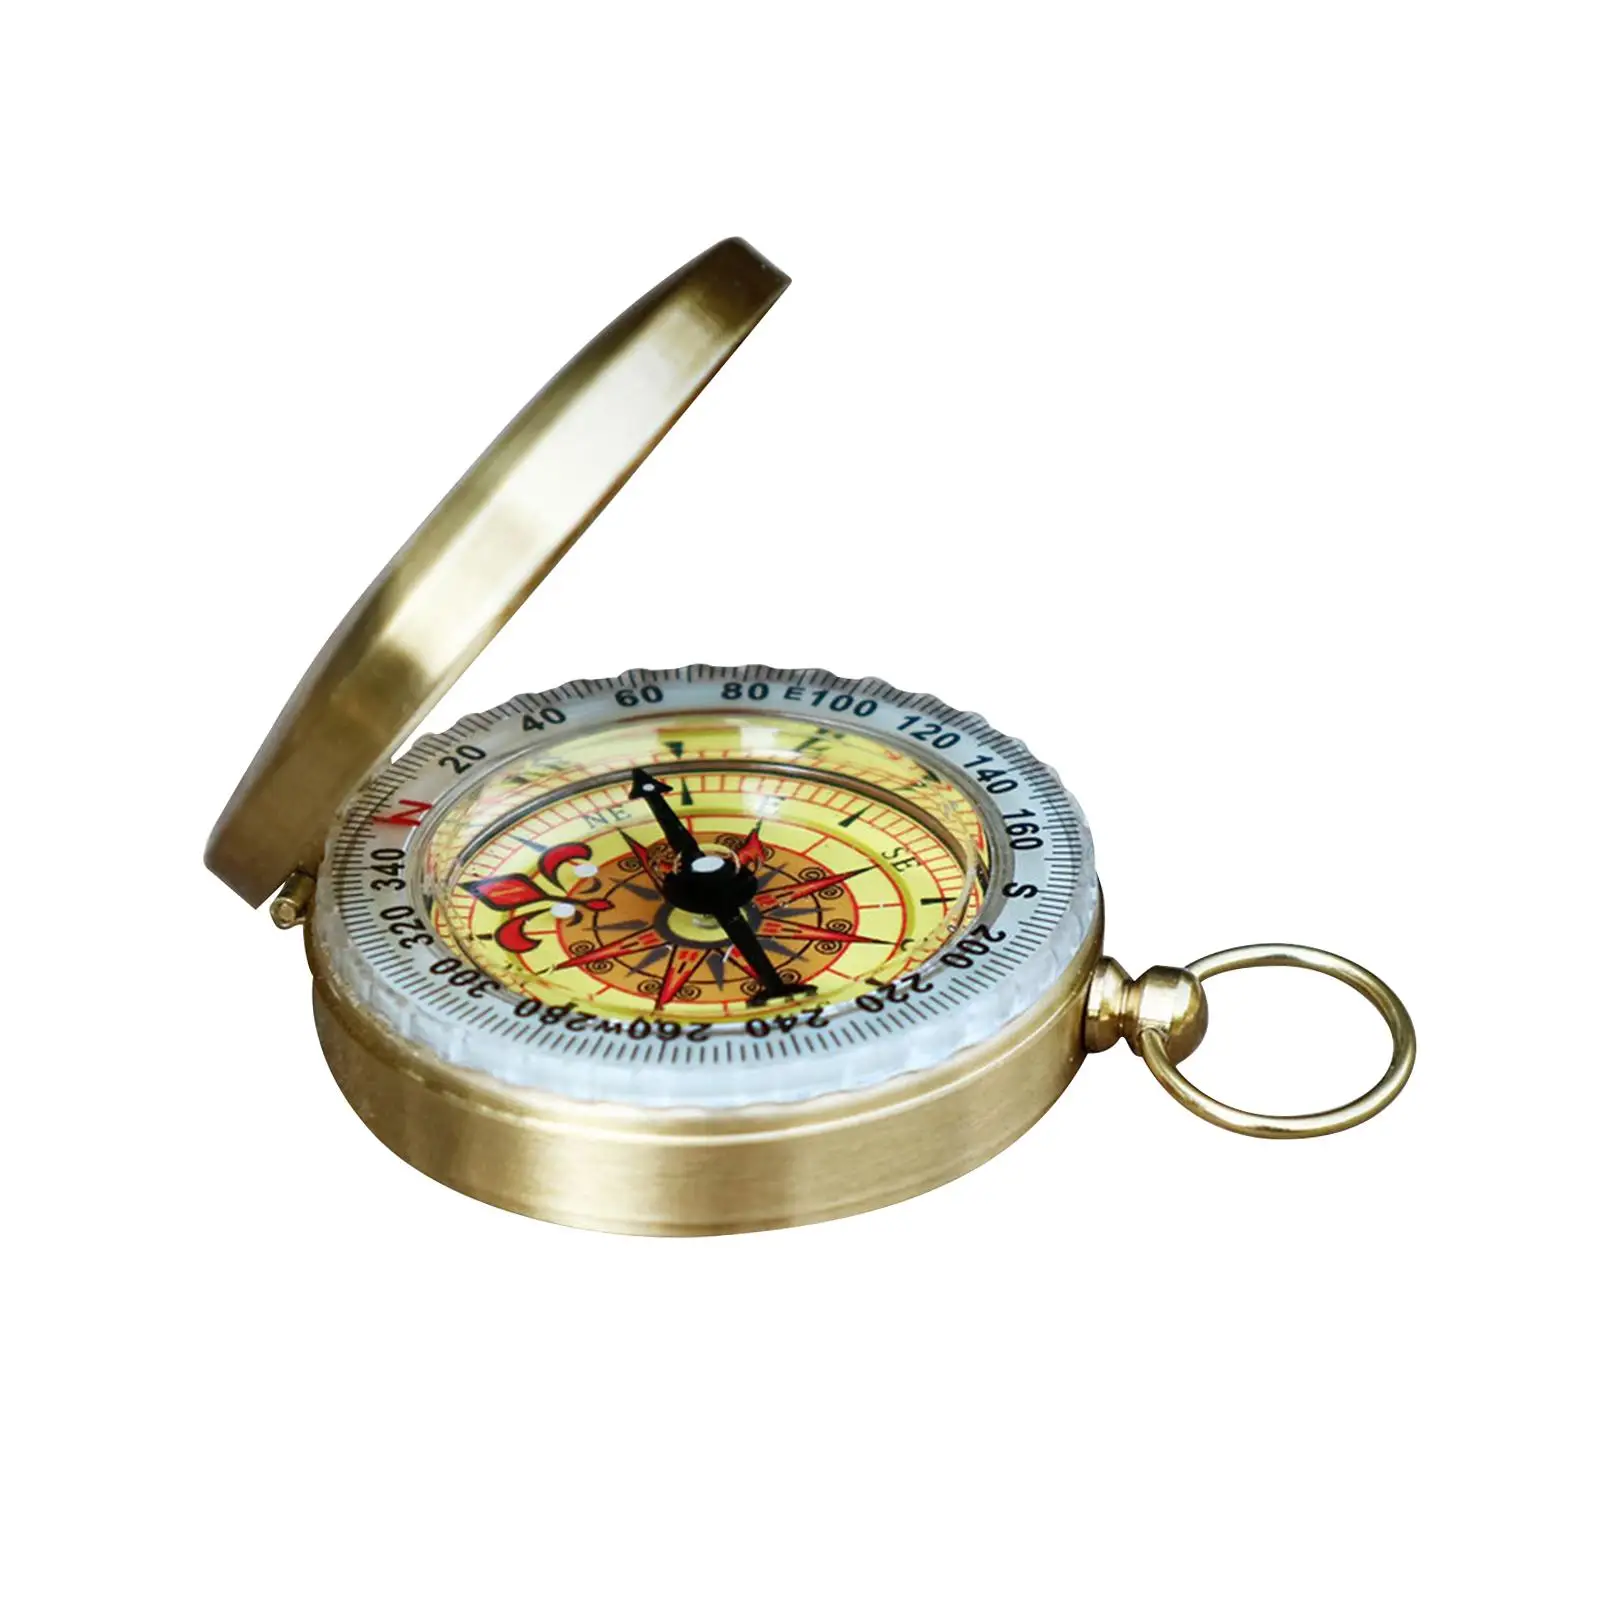 Camping Survival Compass Old Fashioned Glow in The Dark Compact Classic Pocket Style Compass for Navigation Climbing Hiking